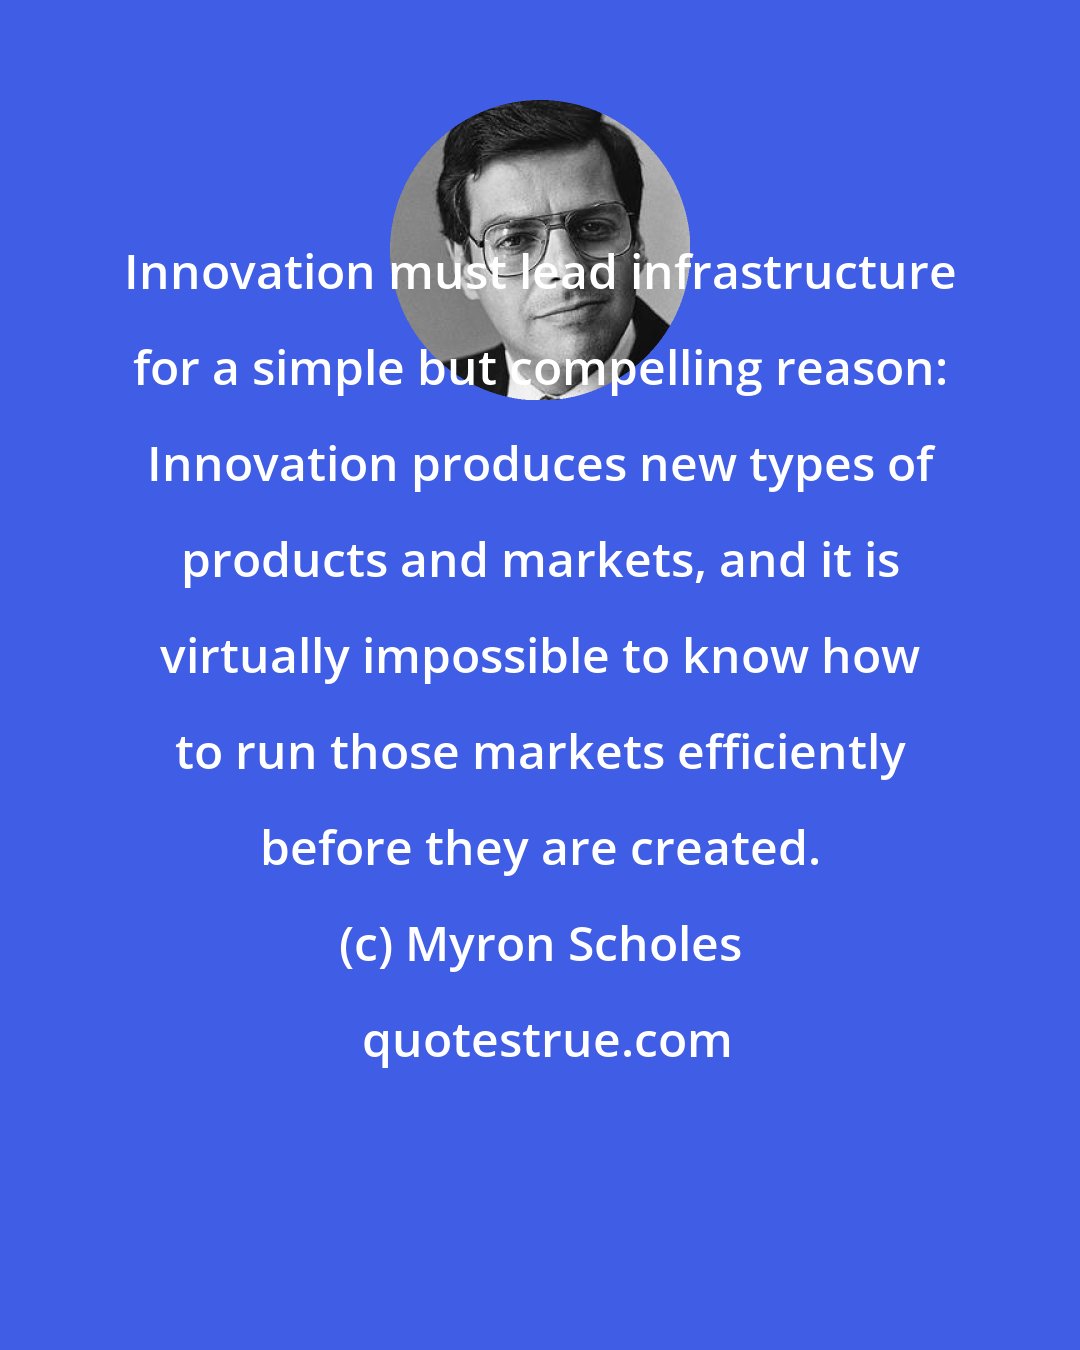 Myron Scholes: Innovation must lead infrastructure for a simple but compelling reason: Innovation produces new types of products and markets, and it is virtually impossible to know how to run those markets efficiently before they are created.